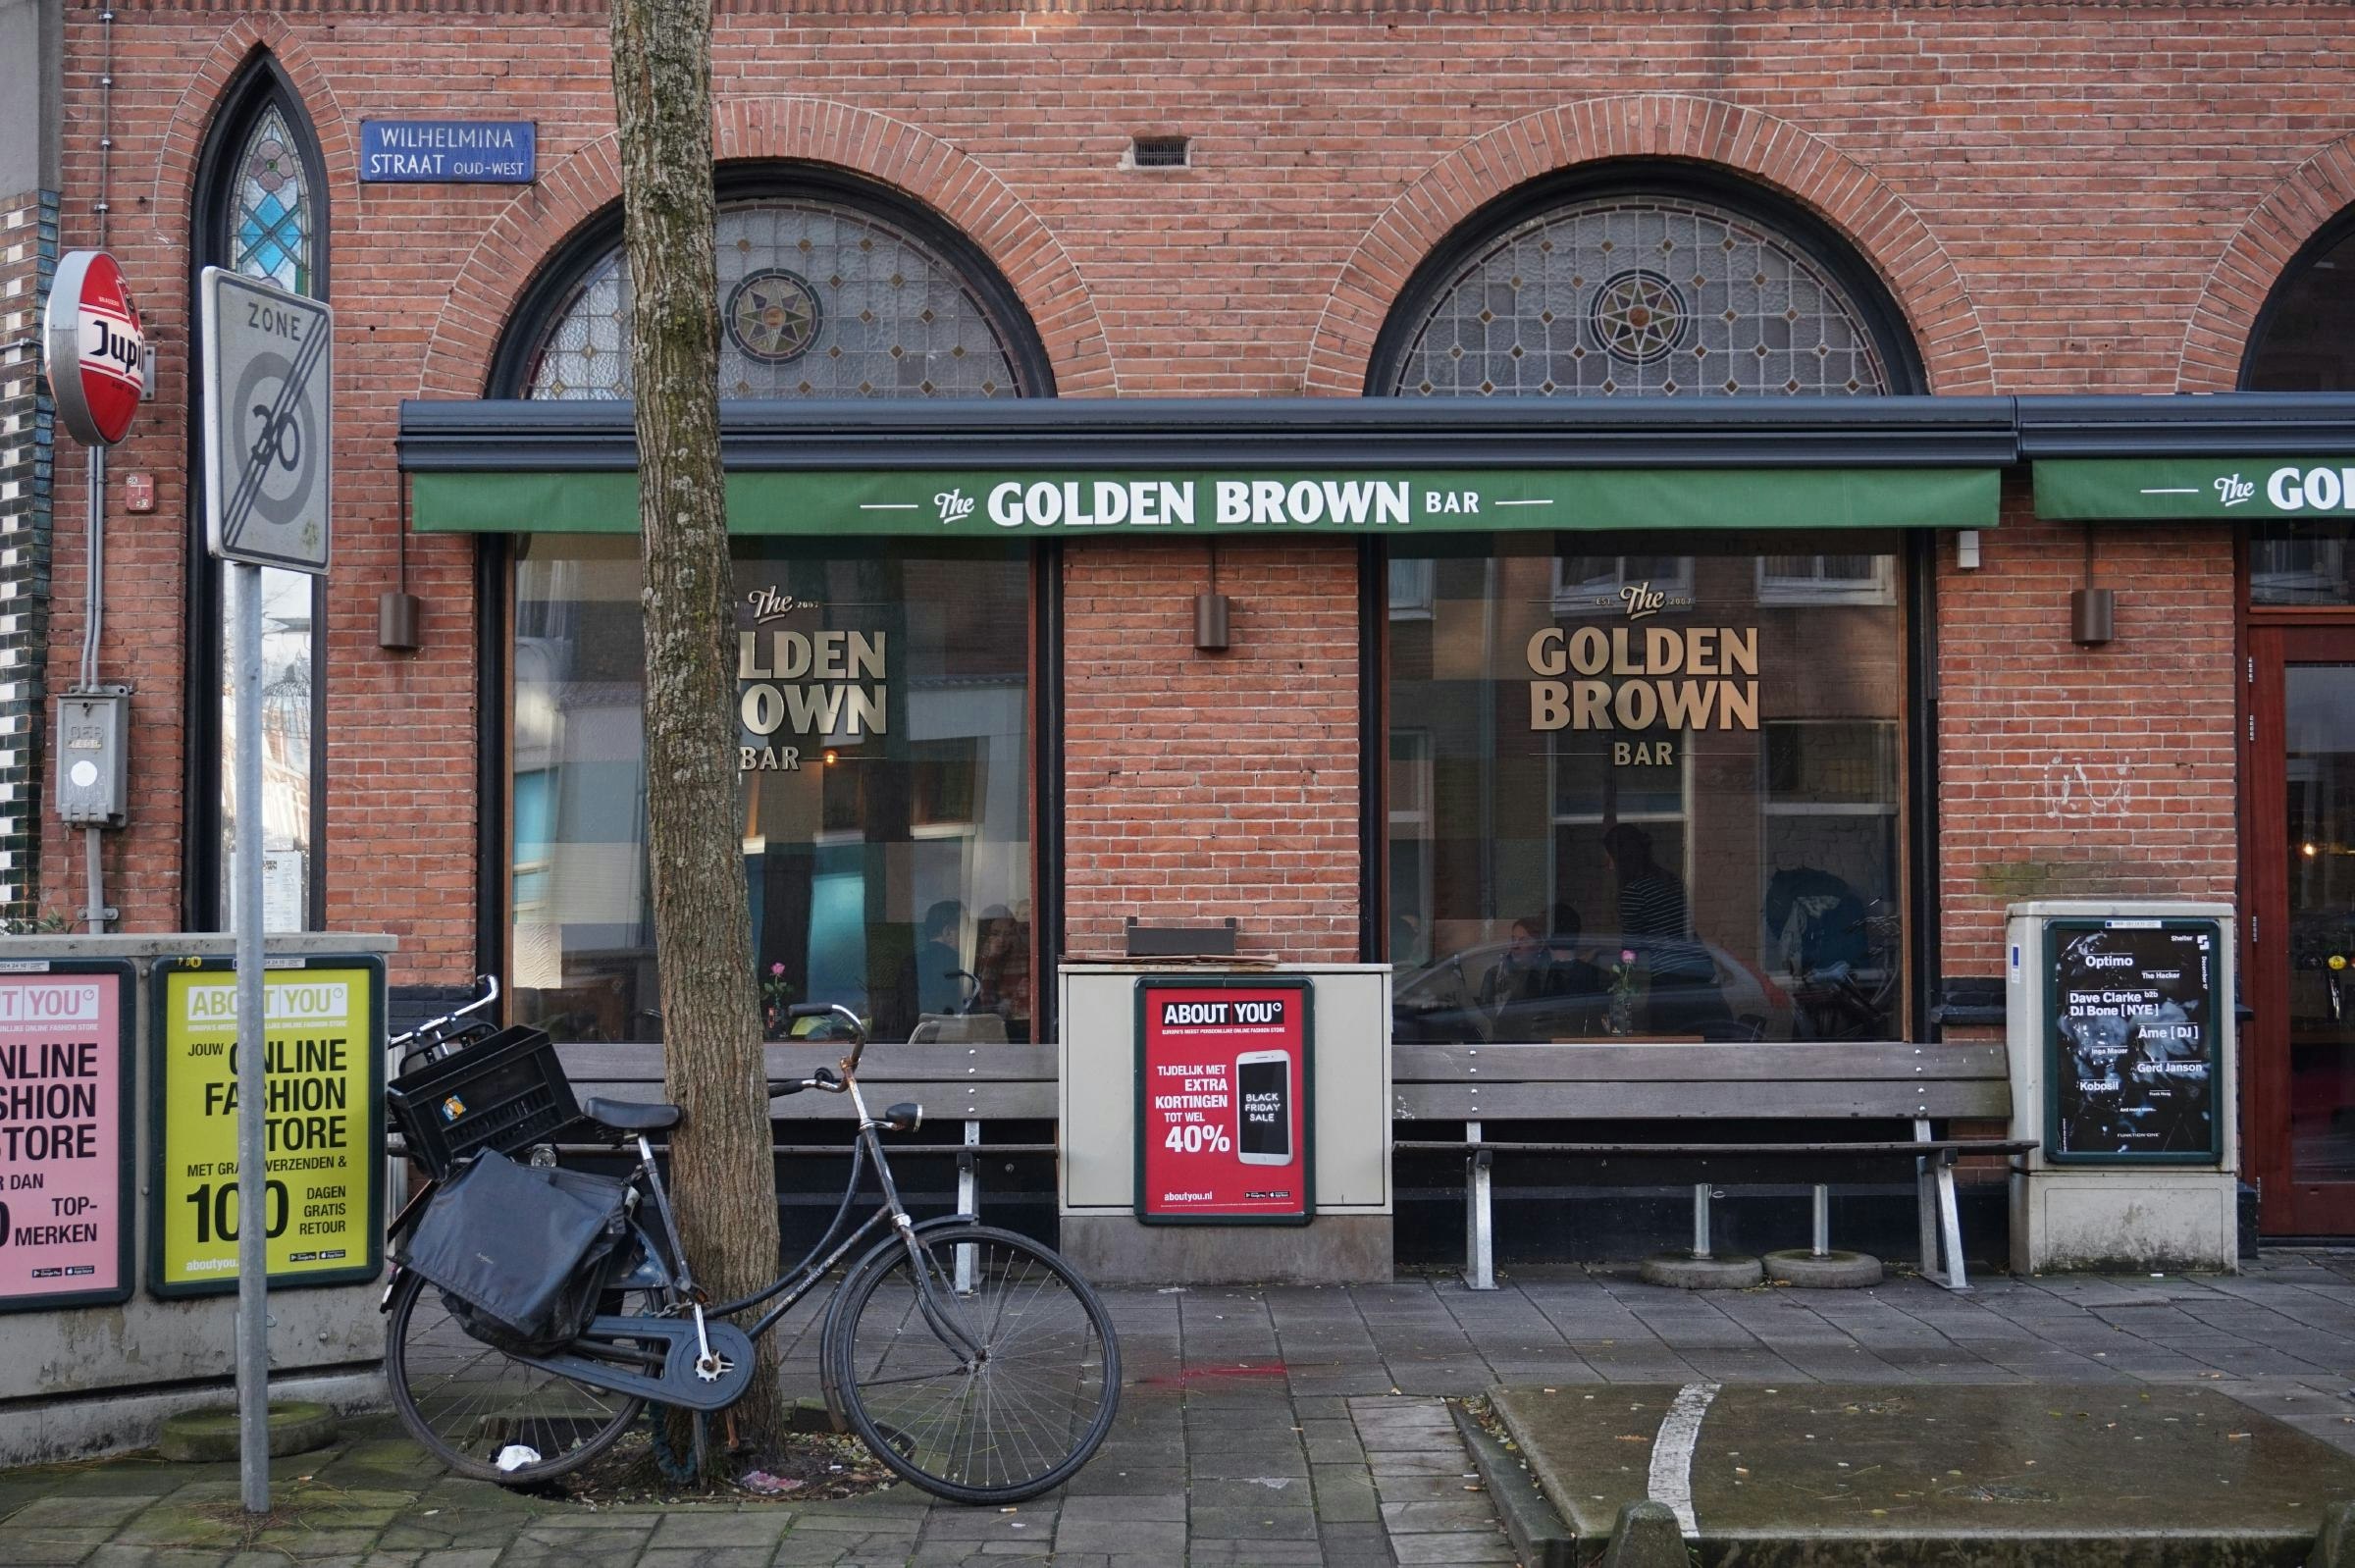 Quench your thirst with a beer at the hip Golden Brown Bar, Amsterdam